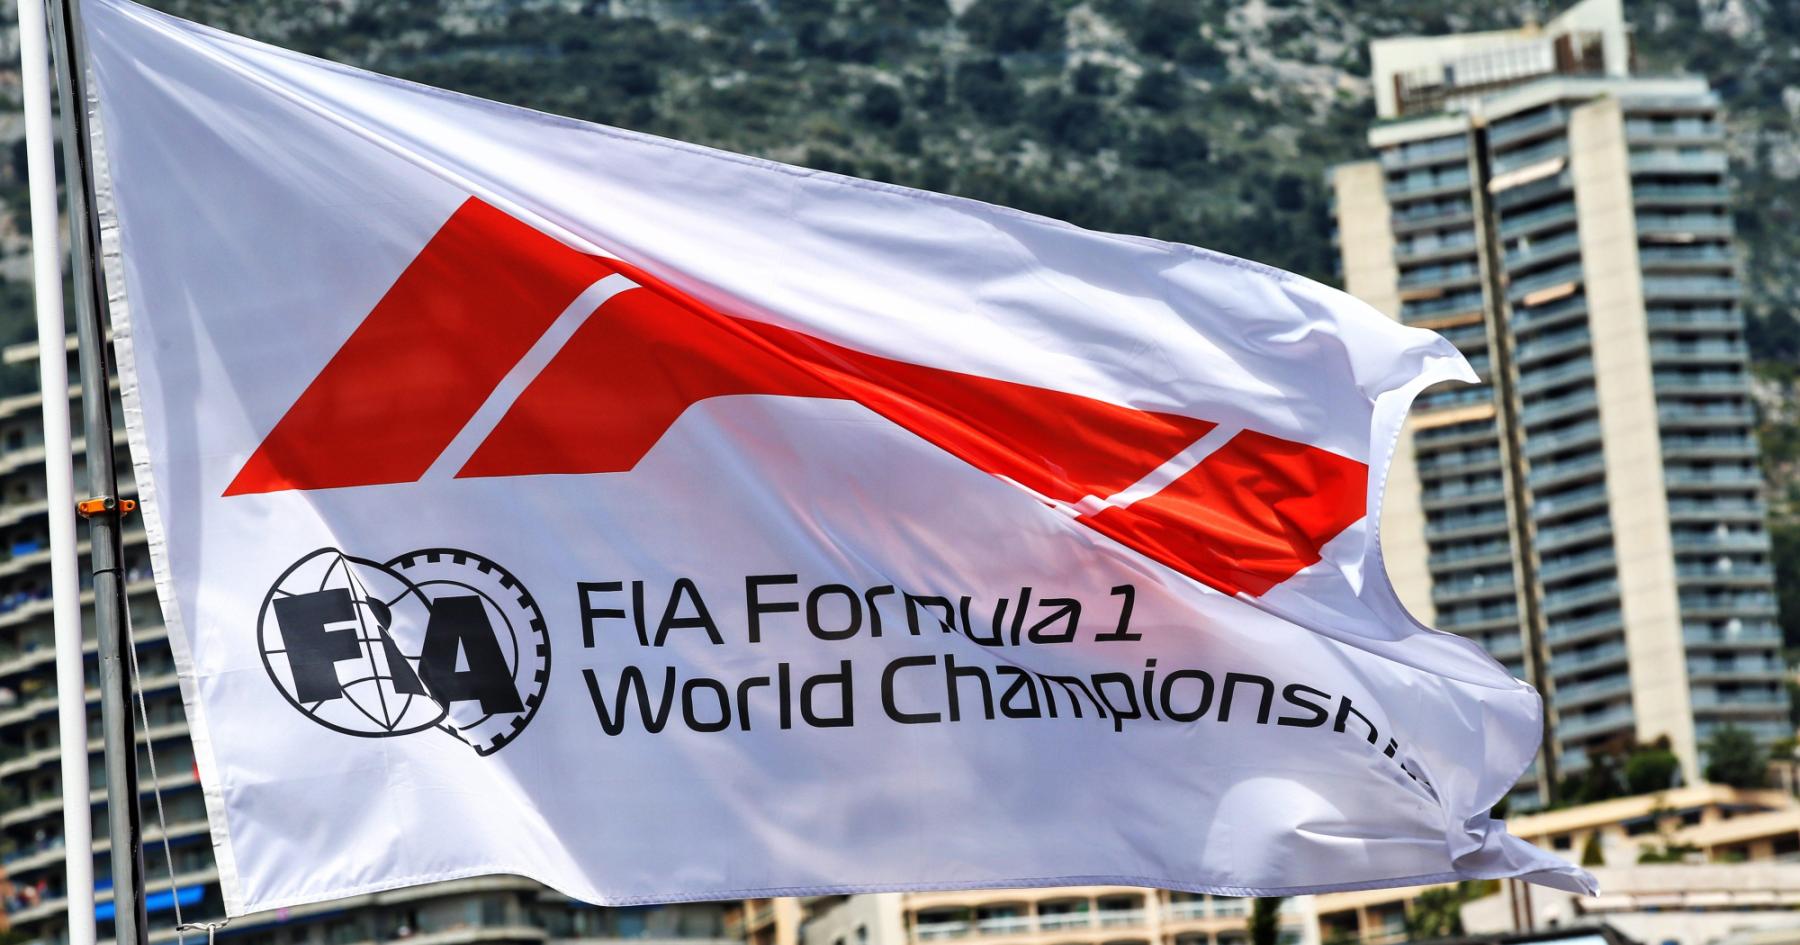 Thrilling Expansion: Formula 1 Contemplates Exciting New Race in Asia